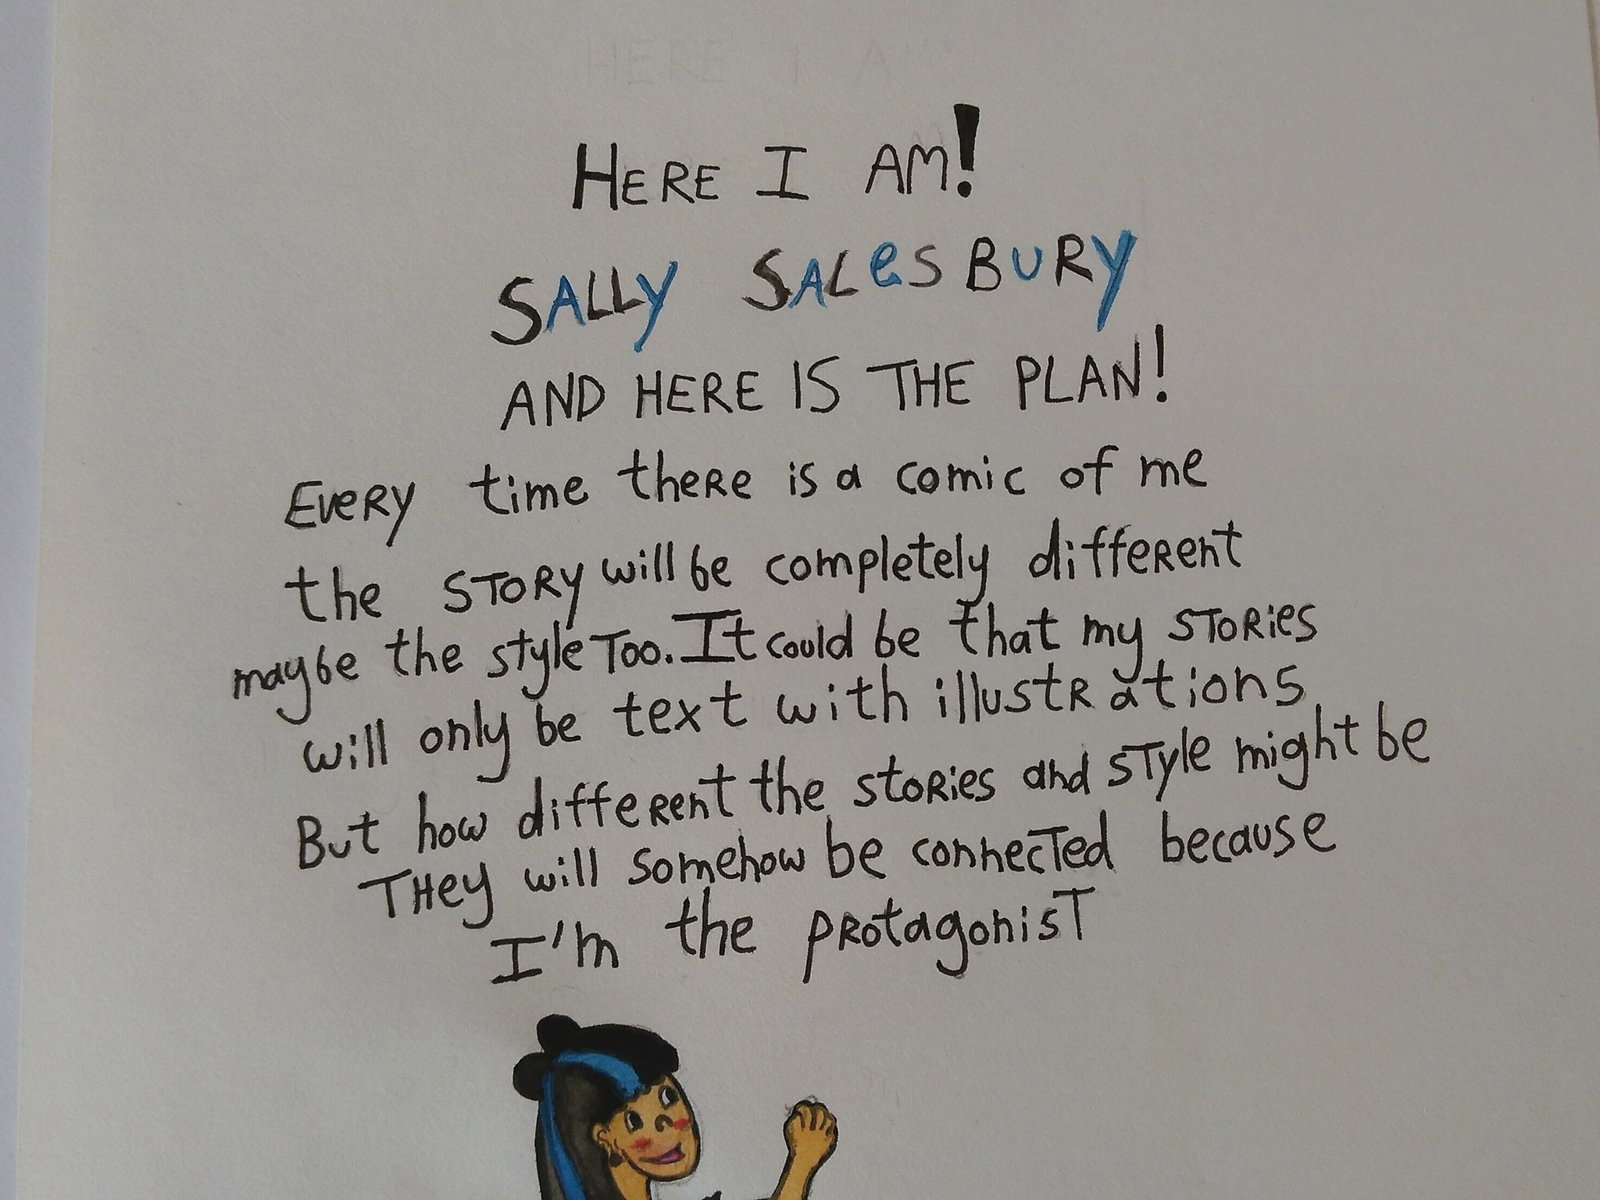 Photo by Bucklemonster with the username @Bucklemonster, who is a verified user,  July 12, 2019 at 1:53 PM and the text says 'Here I am:
Sally Salesbury!

And here is the plan:
Every time there is a comic of me
the story will be completely different
maybe the style too. It could be that my stories 
will only be text with illustrations.
But how different the stories and..'